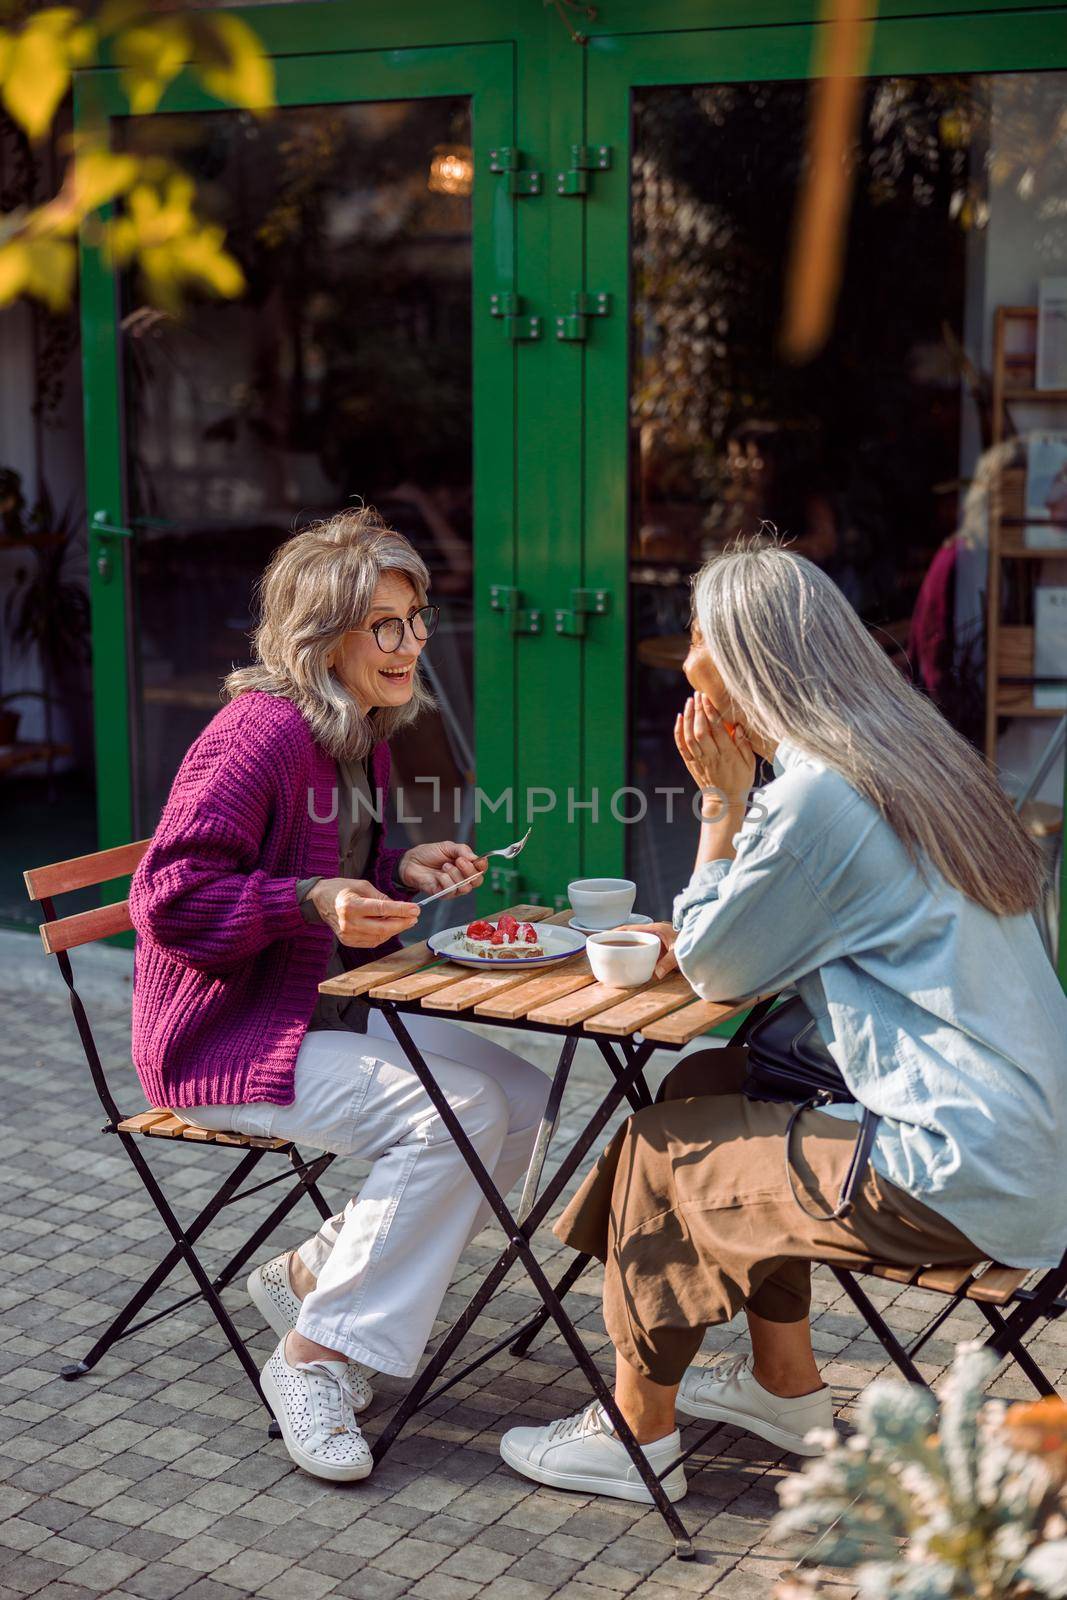 Joyful mature woman with long haired friend sit at small table with dessert and drinks on outdoors cafe terrace on autumn day